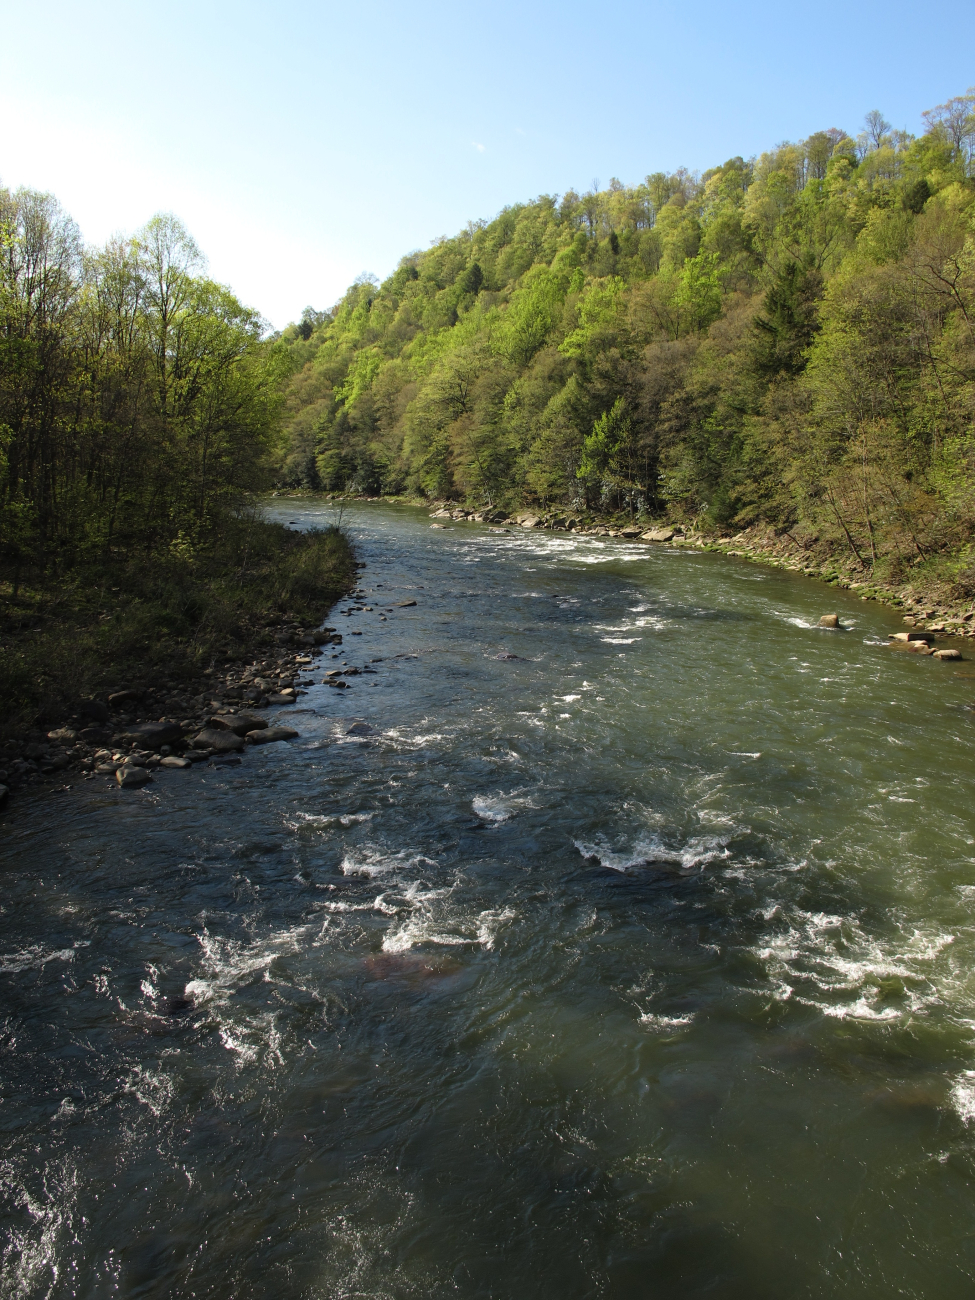 The Casselman River in western Maryland